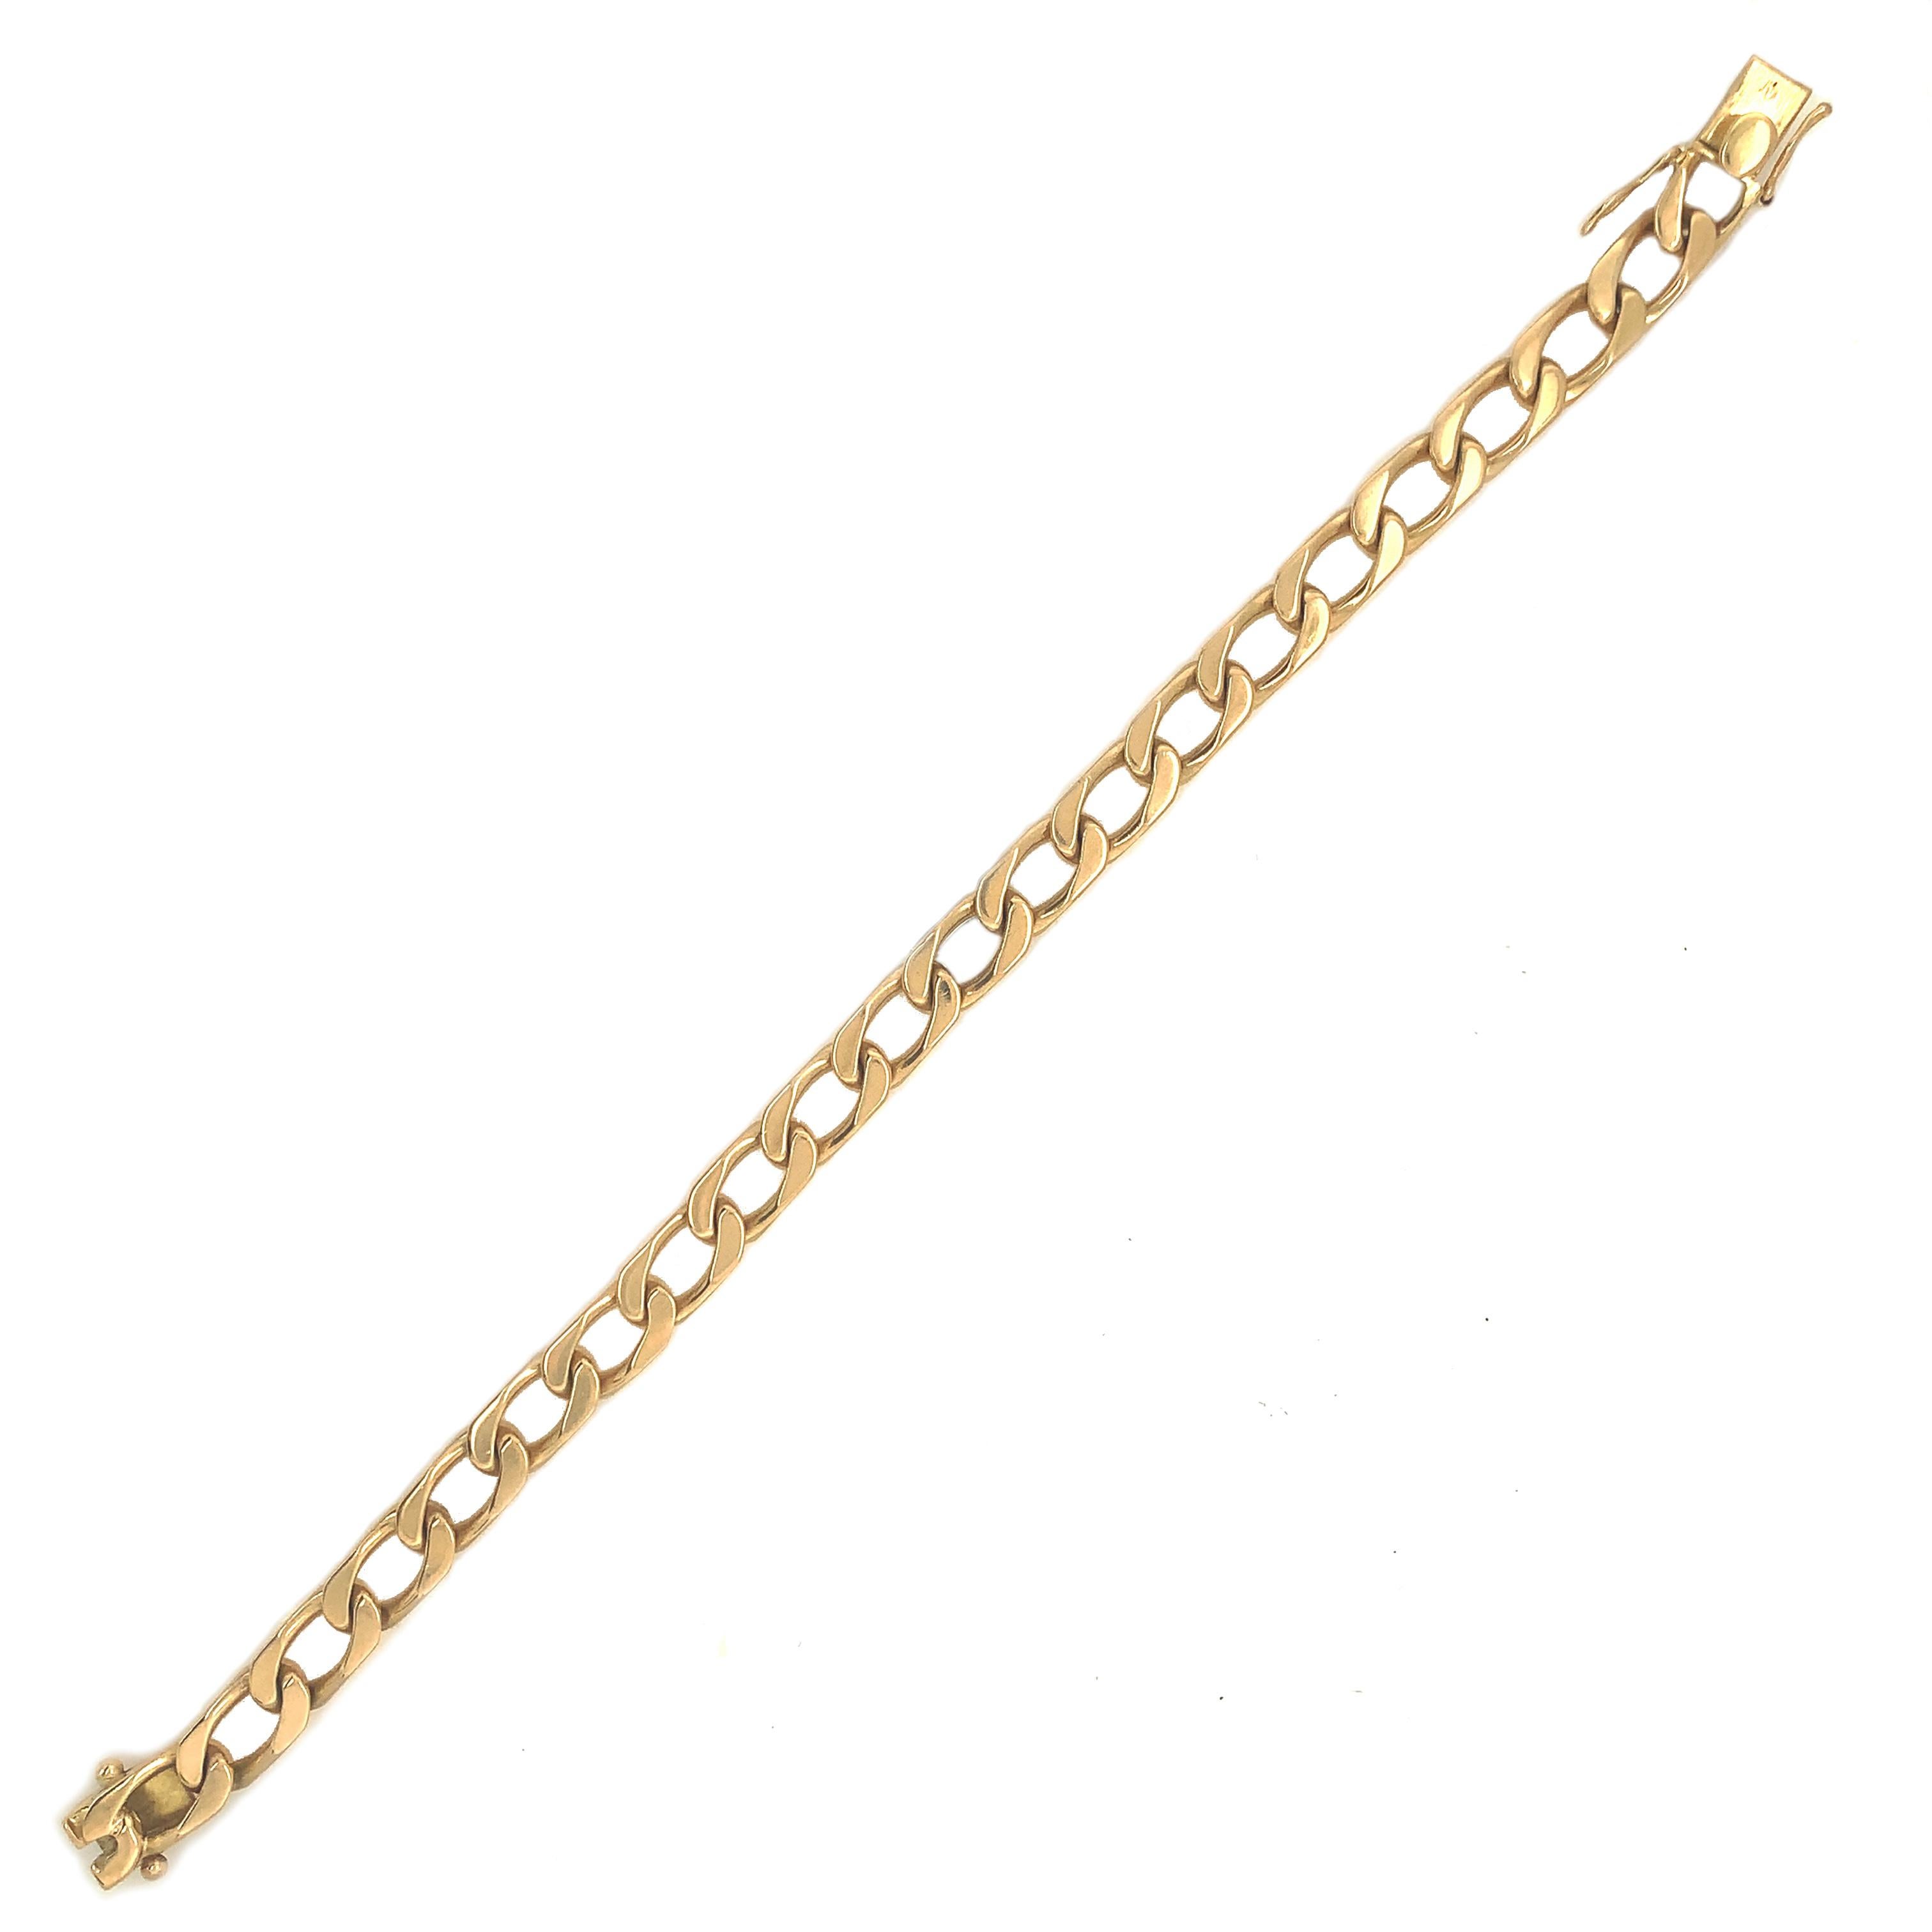 Classic curb link bracelet.  Made, signed and numbered by CARTIER Paris.  Solid gauge 18K yellow gold.  7 1/2